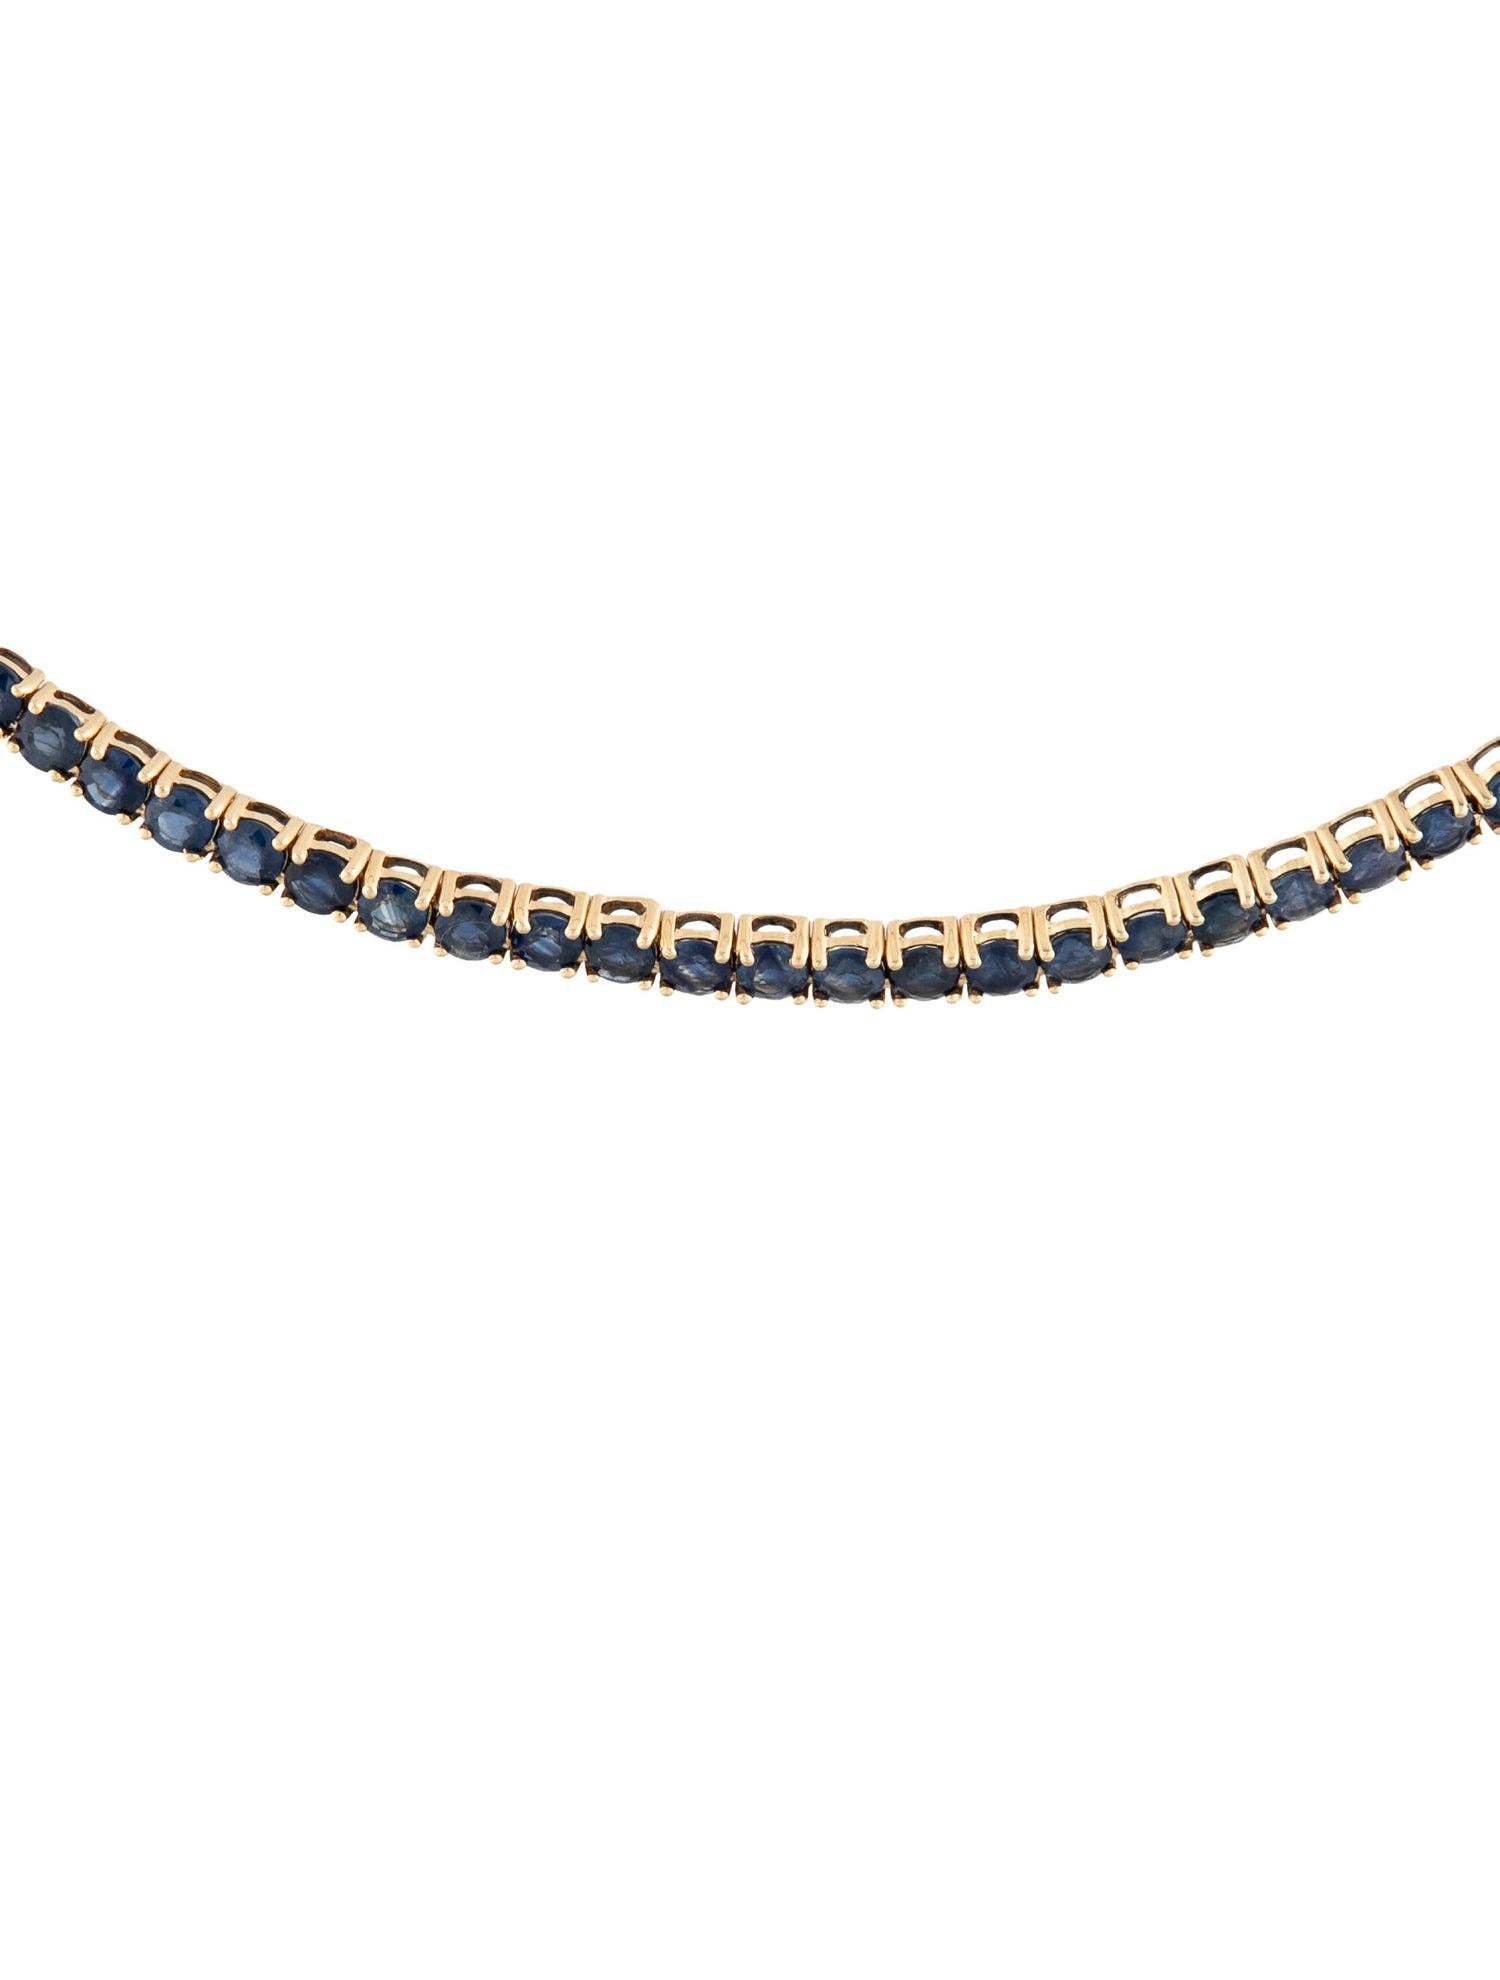 Brilliant Cut 14K Sapphire Collar Necklace 12.42ctw - Stunning Statement Piece for Glamour For Sale